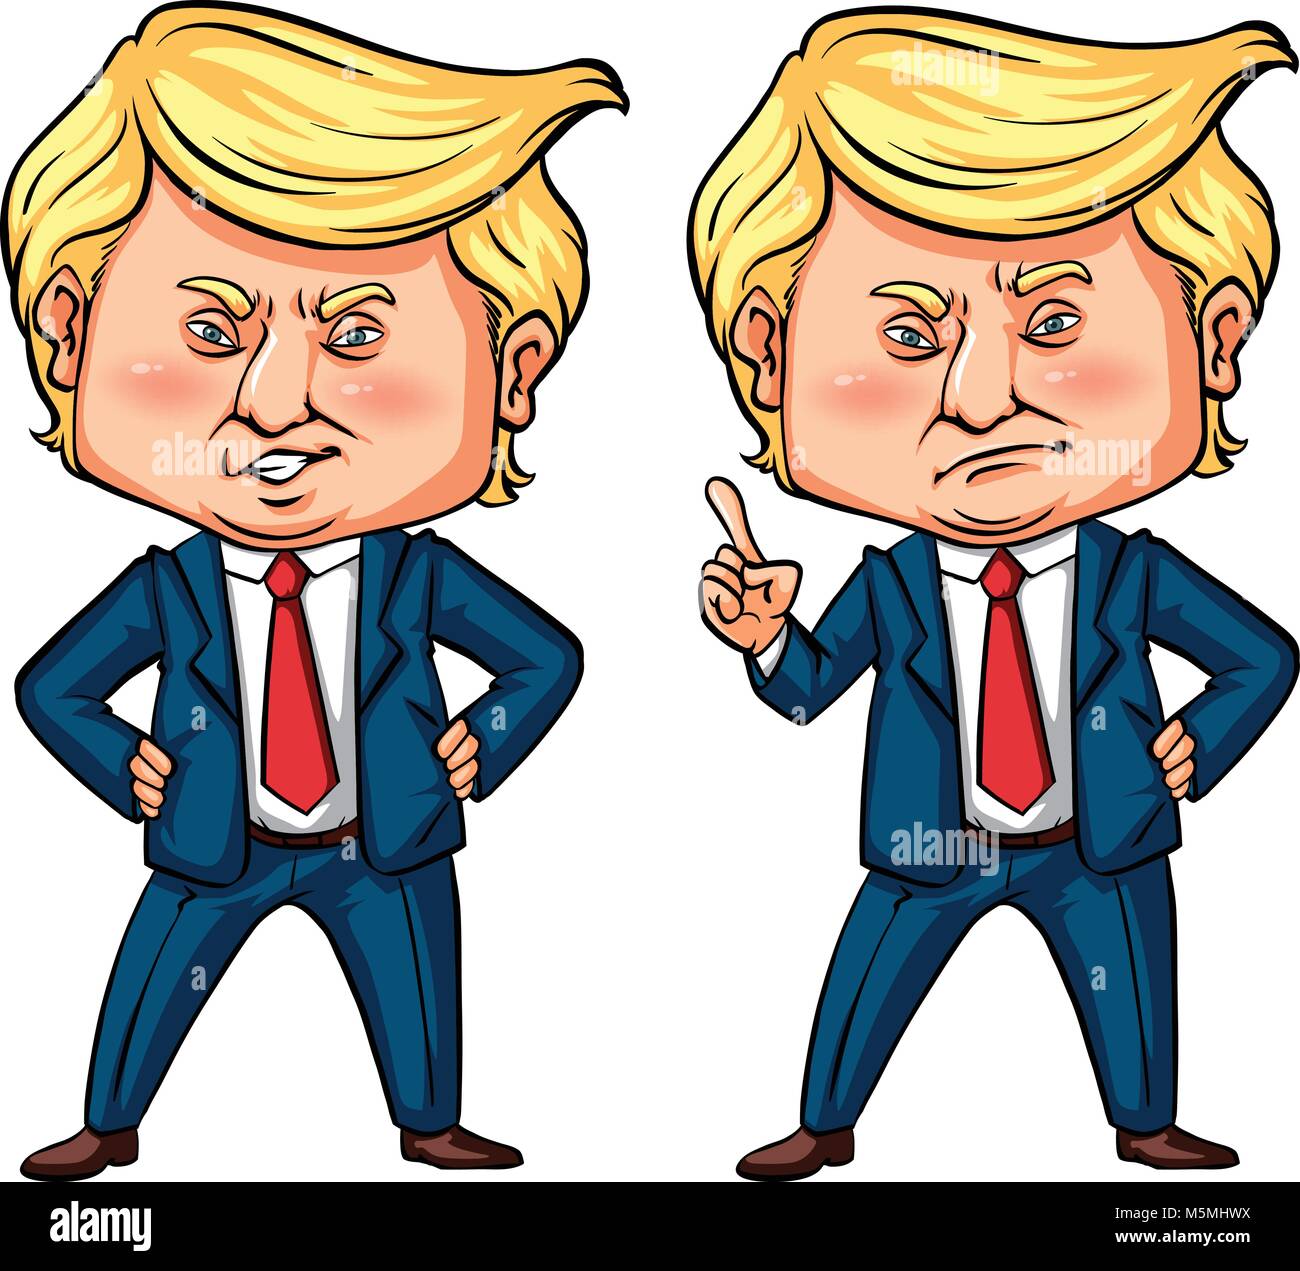 President Trump in two actions illustration Stock Vector